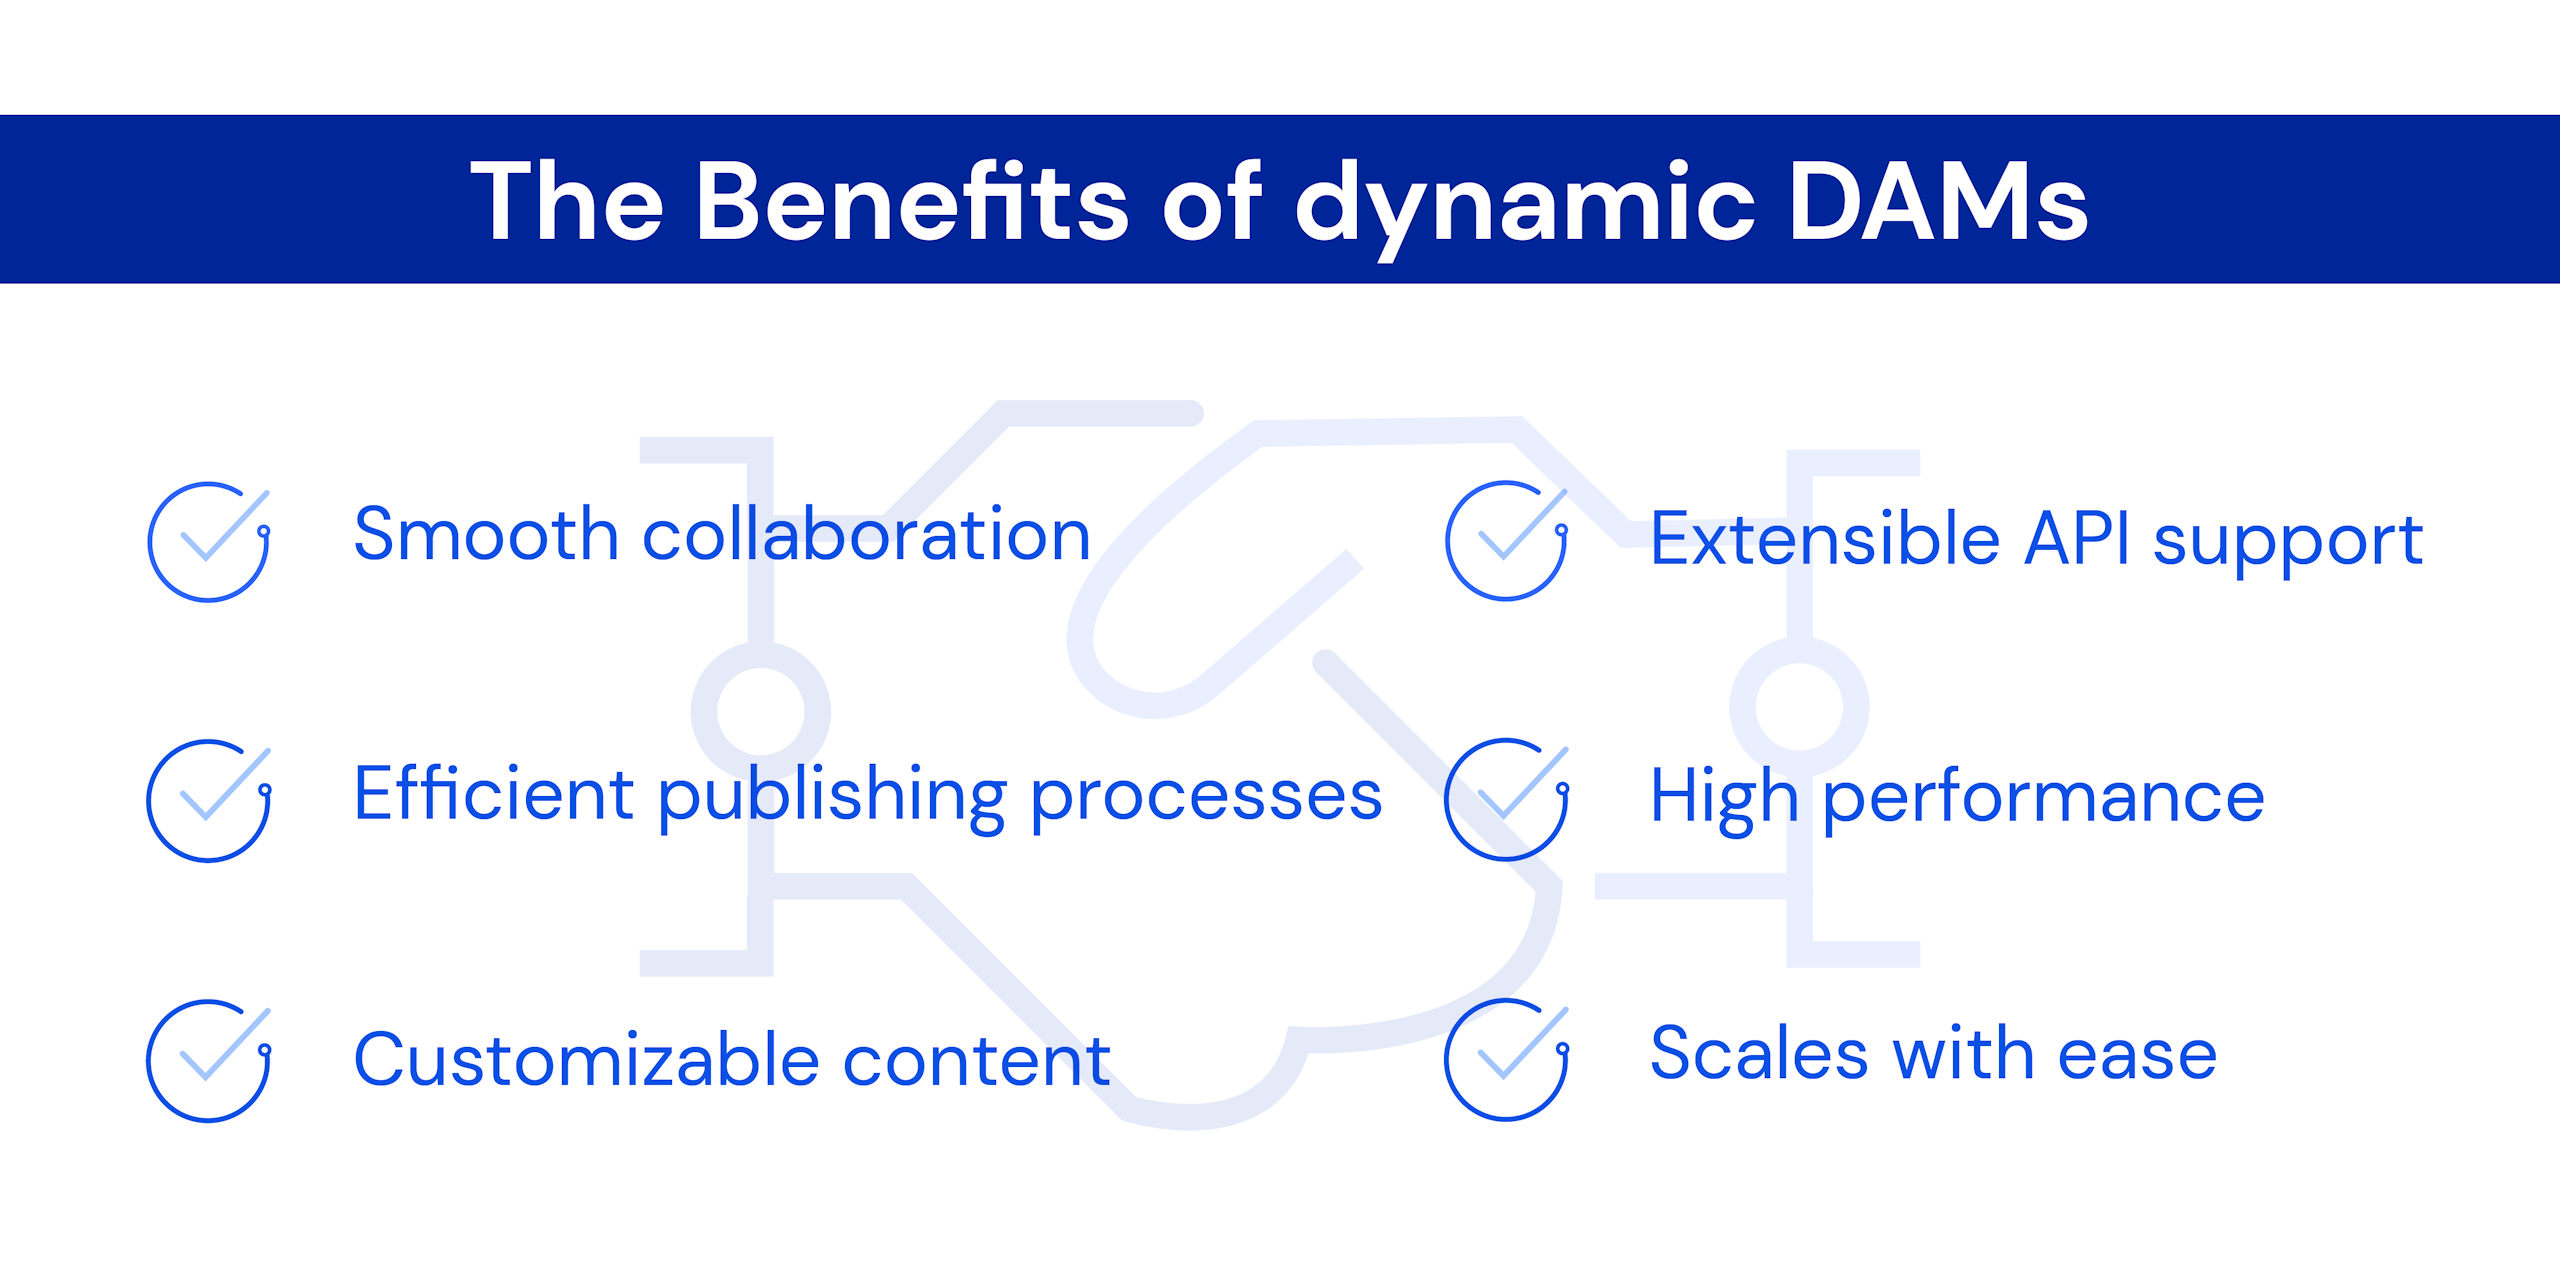 The benefits of dynamic DAMs